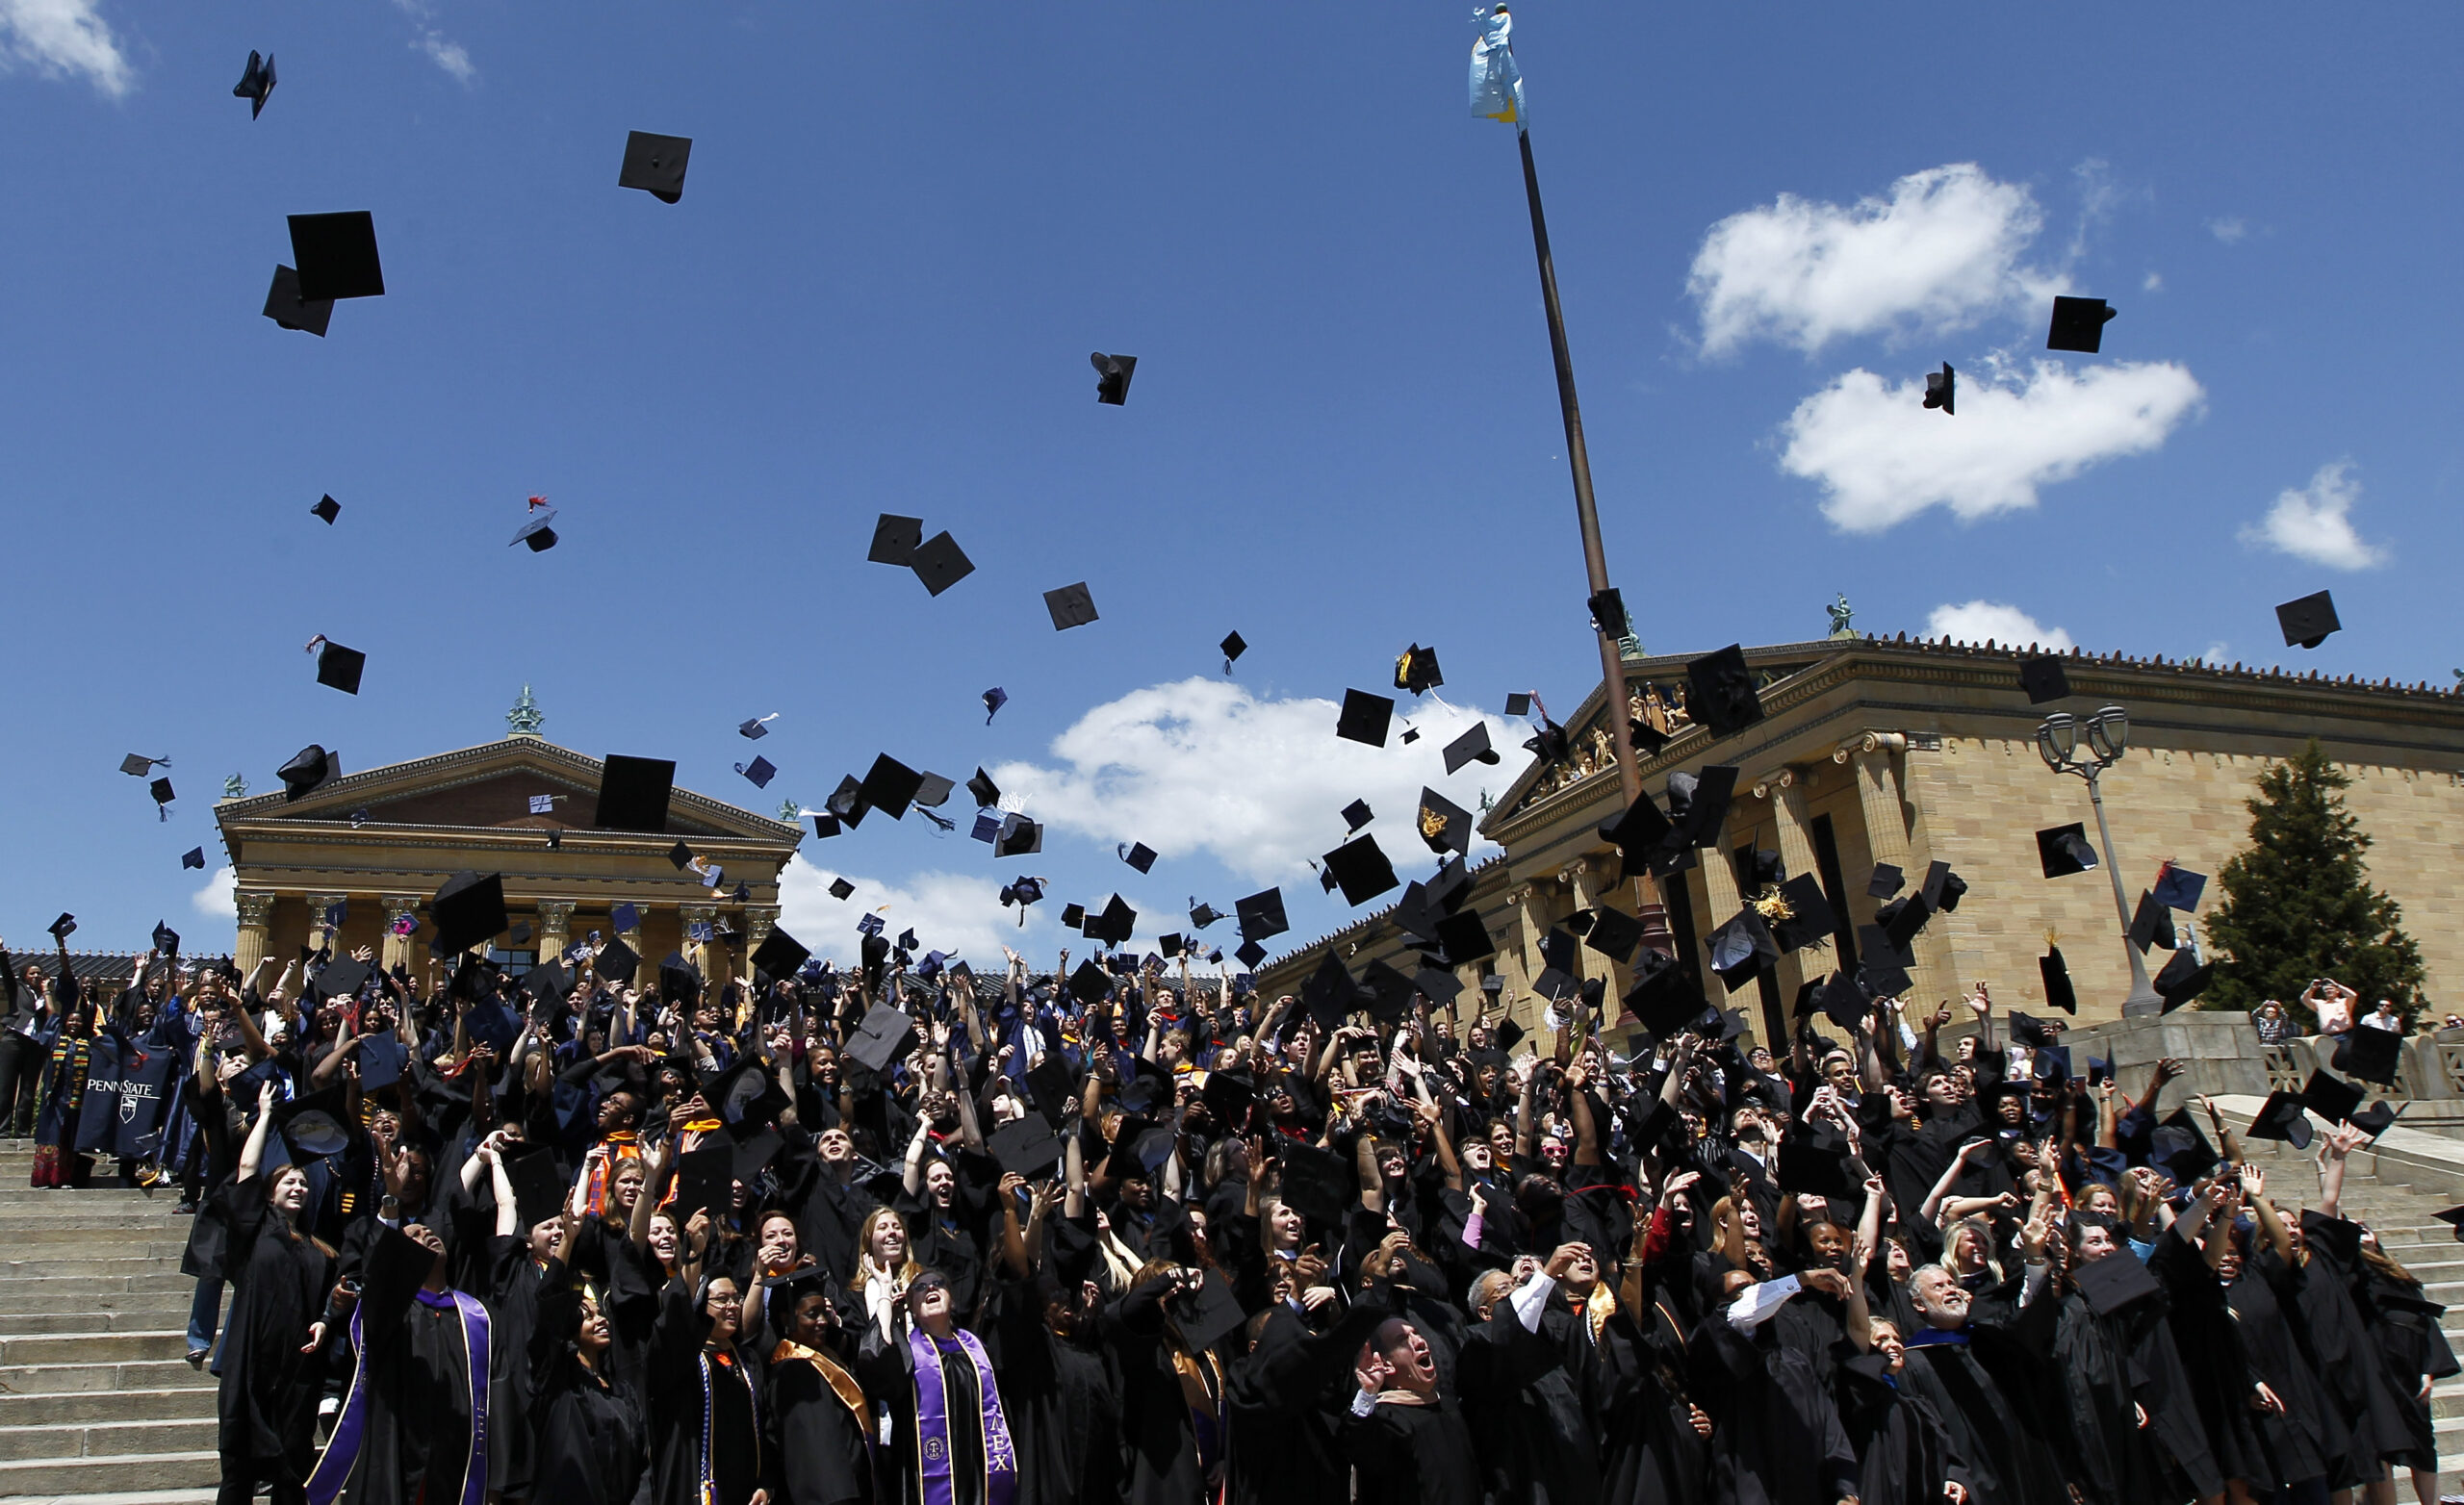 Graduating students throw mortarboards in the air